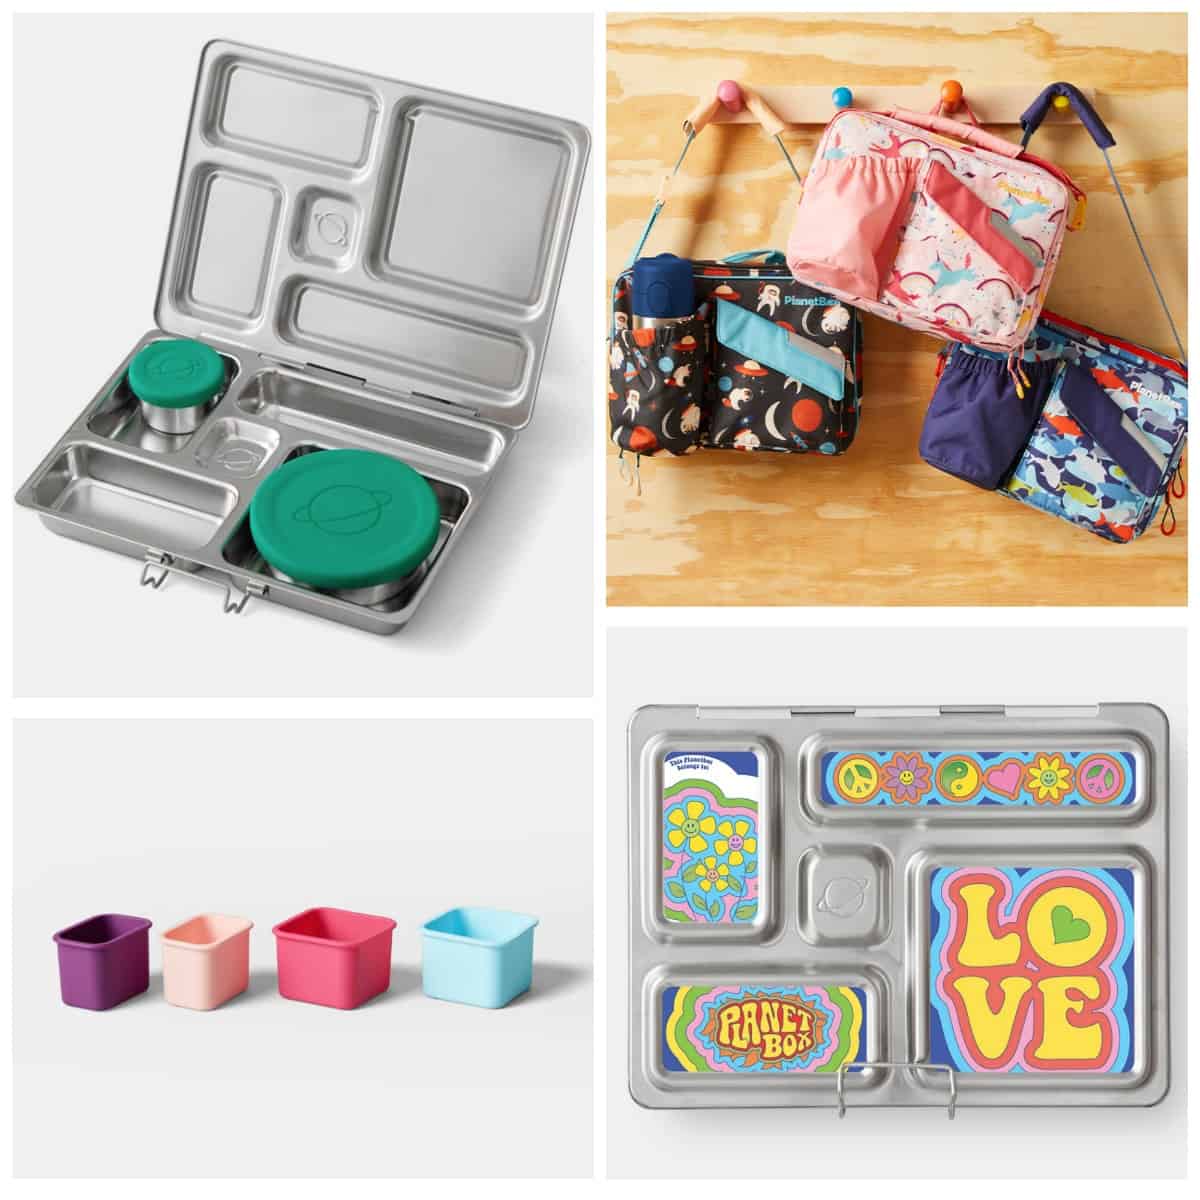 4-photo collage: planetbox lunchbox, carry bag, dip containers, lunchbox magnets